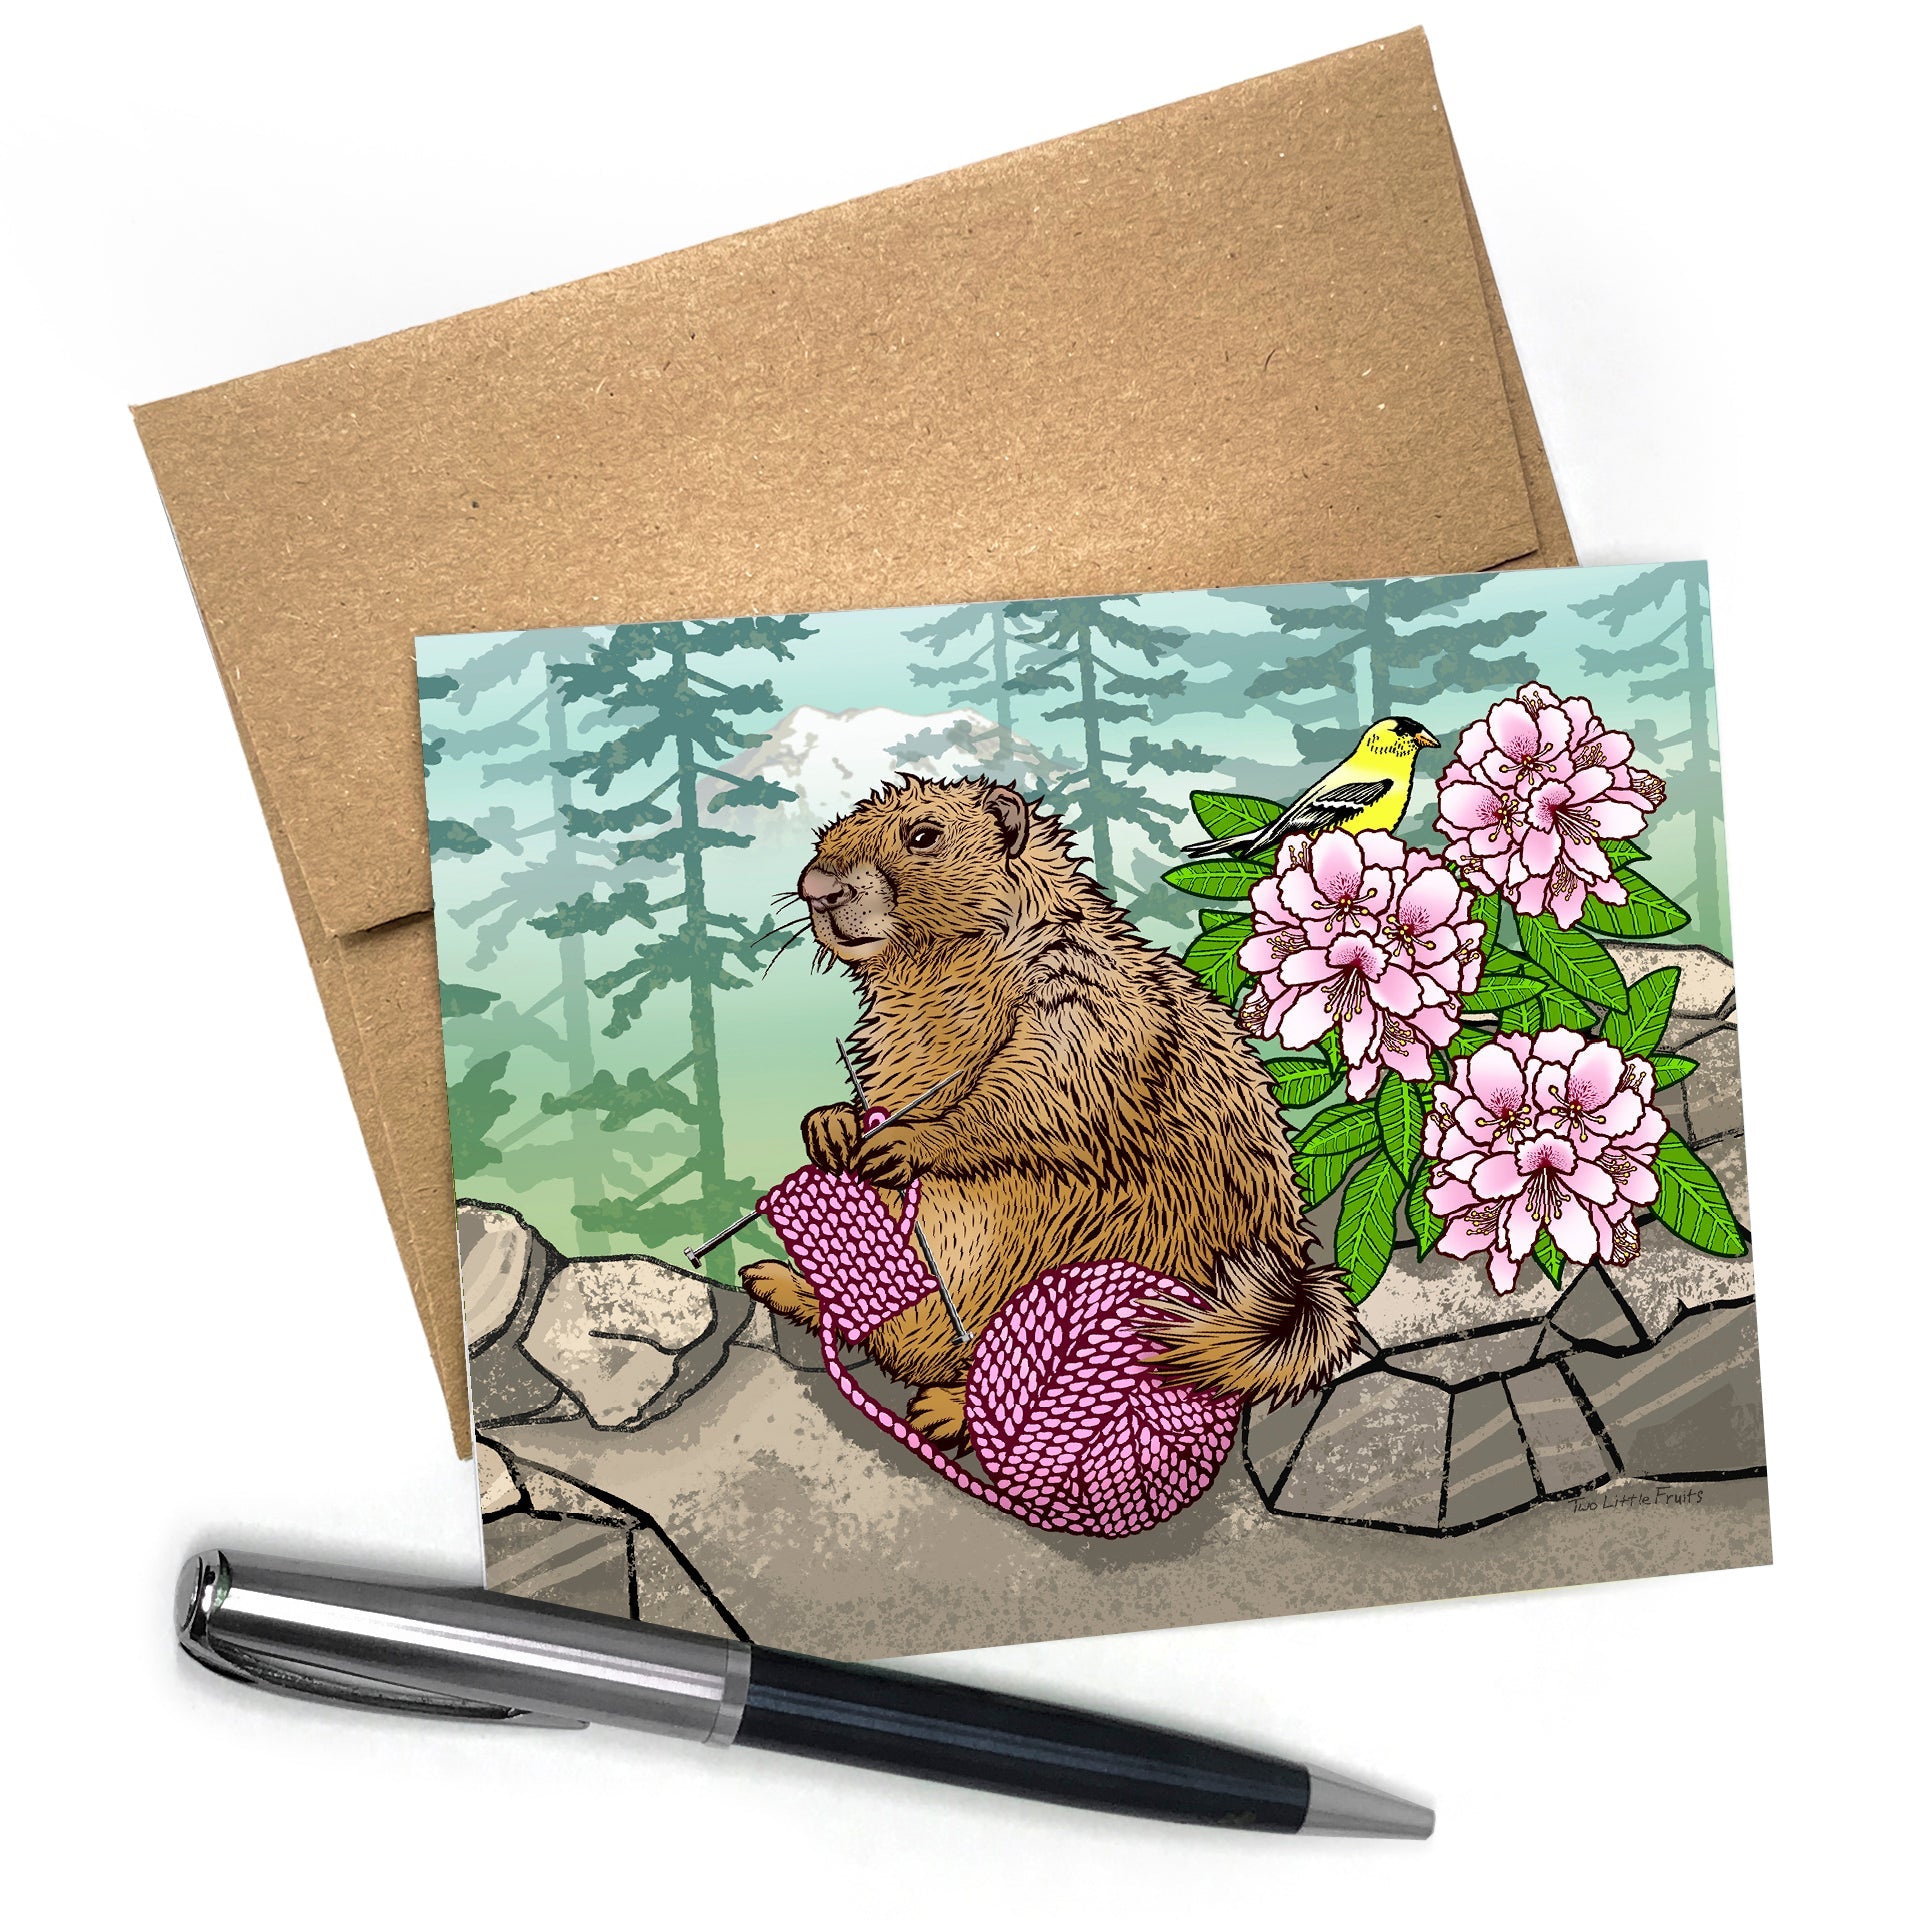 Knitting Marmot Greeting Card - Two Little Fruits